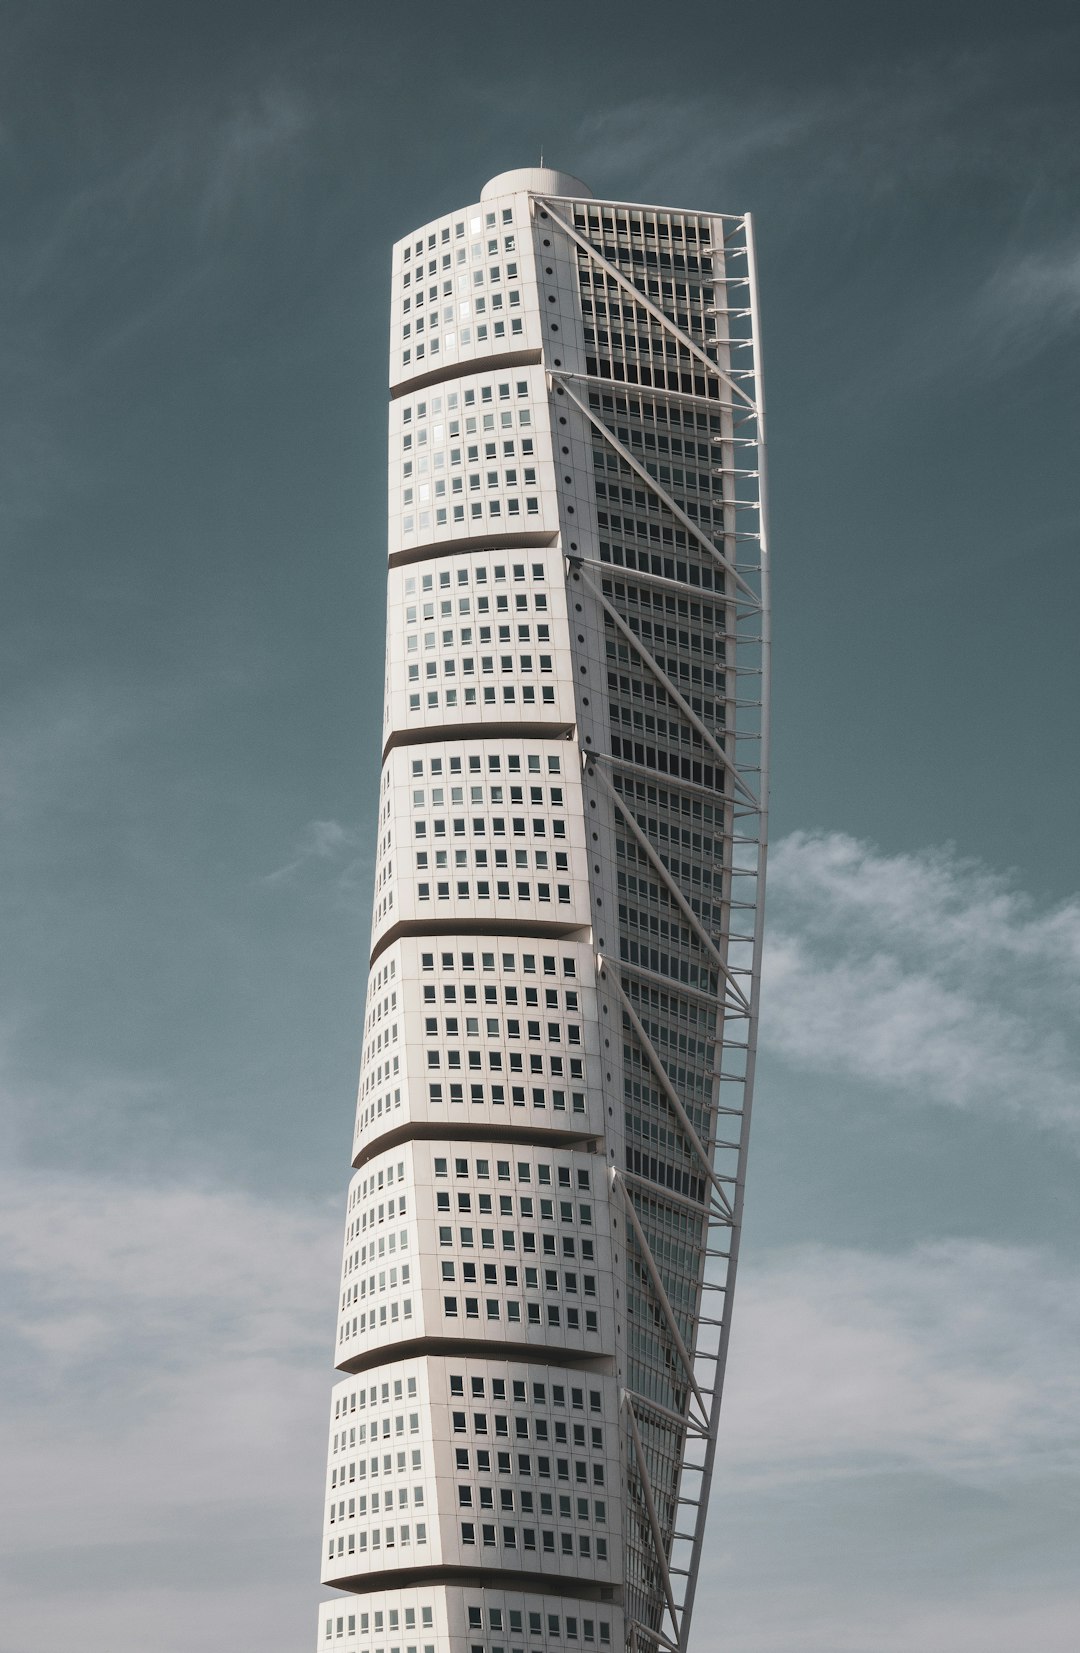 Travel Tips and Stories of Turning Torso in Sweden